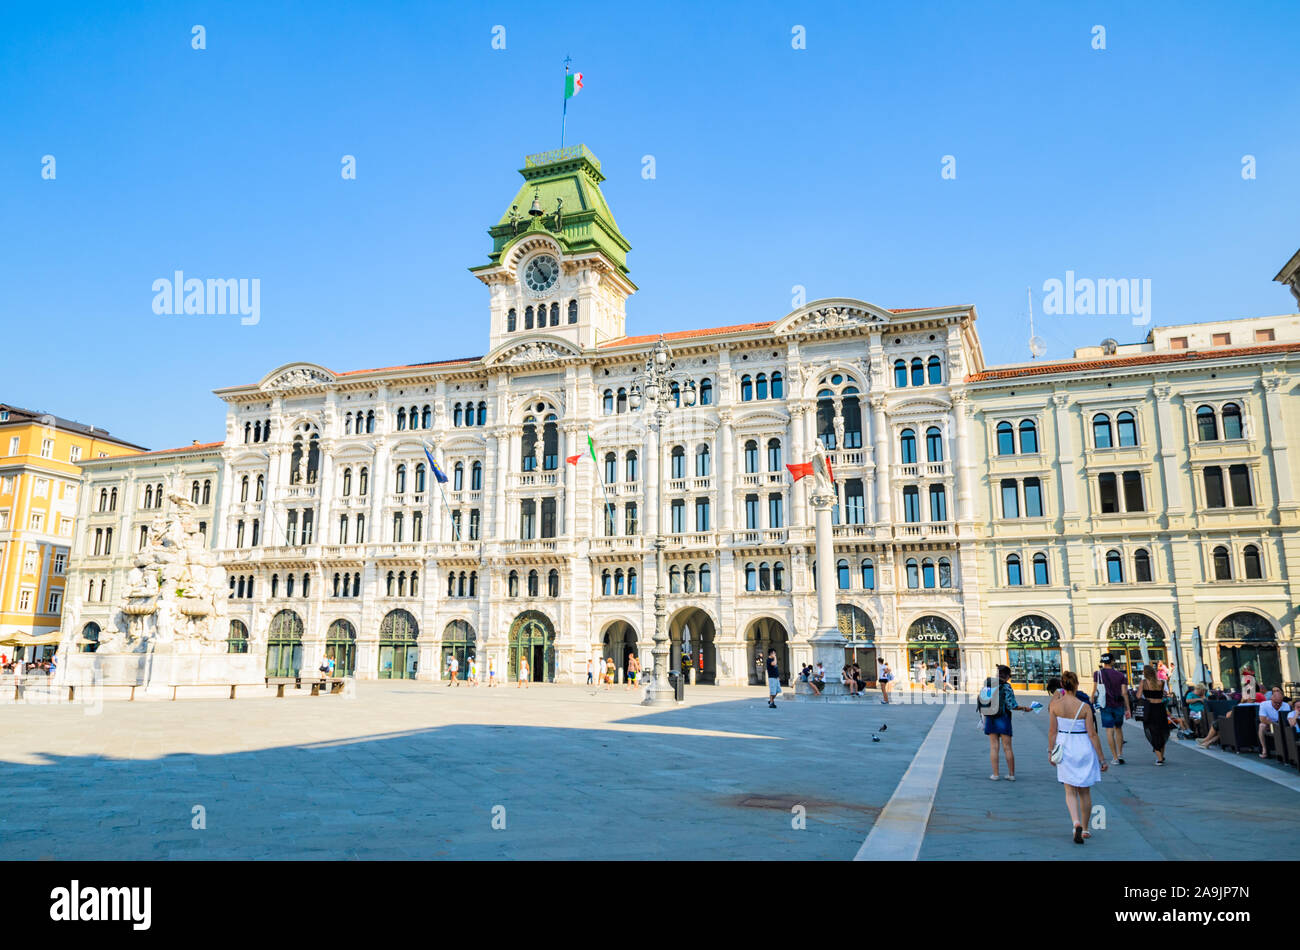 Trieste, Italy - 05.08.2015 : View of Trieste City Hall building in Itally with tourists passing by. Travel destination Stock Photo